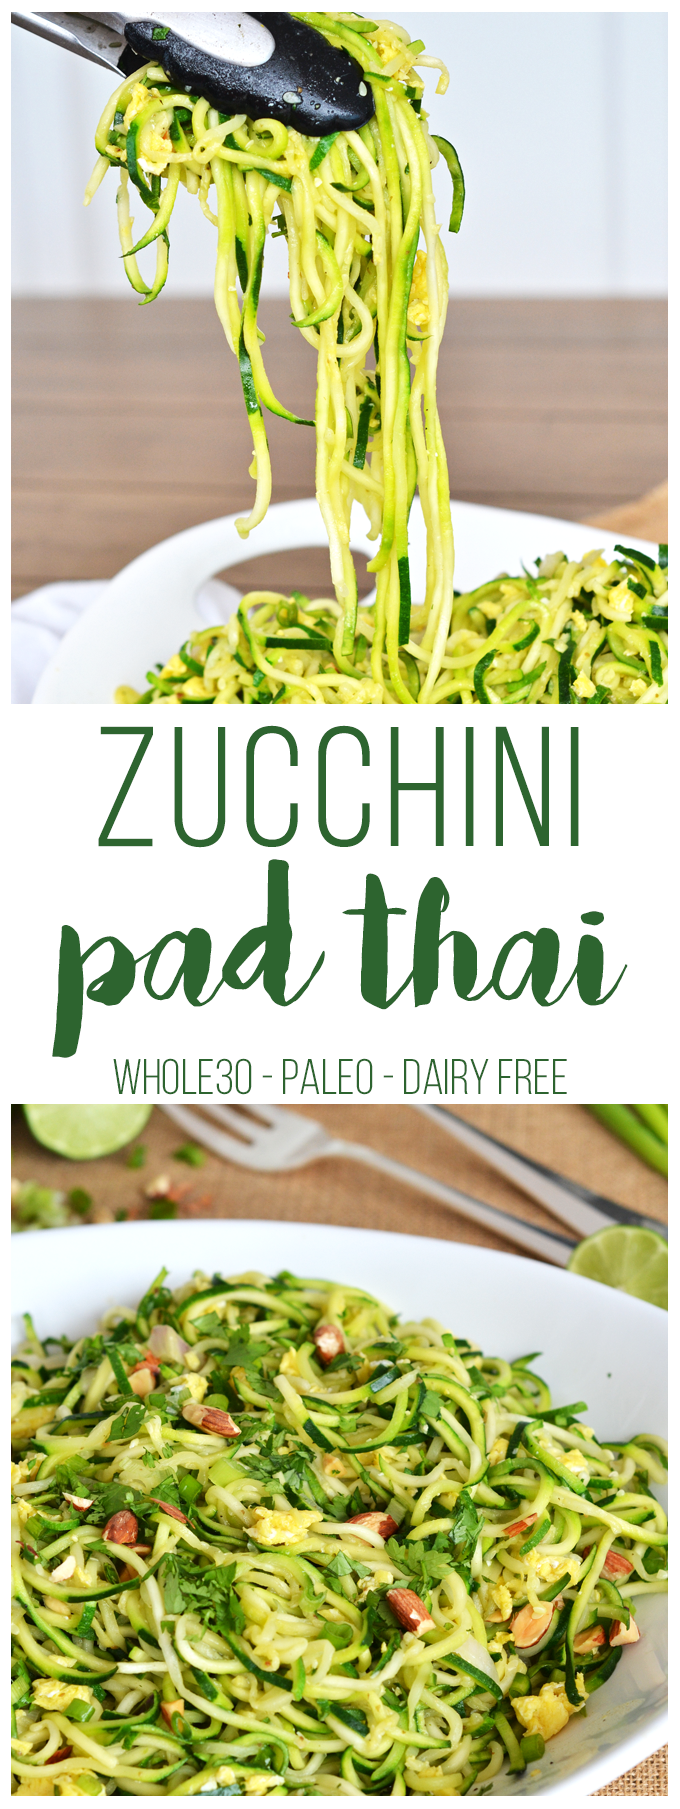 This Zucchini Pad Thai is a perfect Whole30 meal! No added sugar, grain-free and full of flavor!